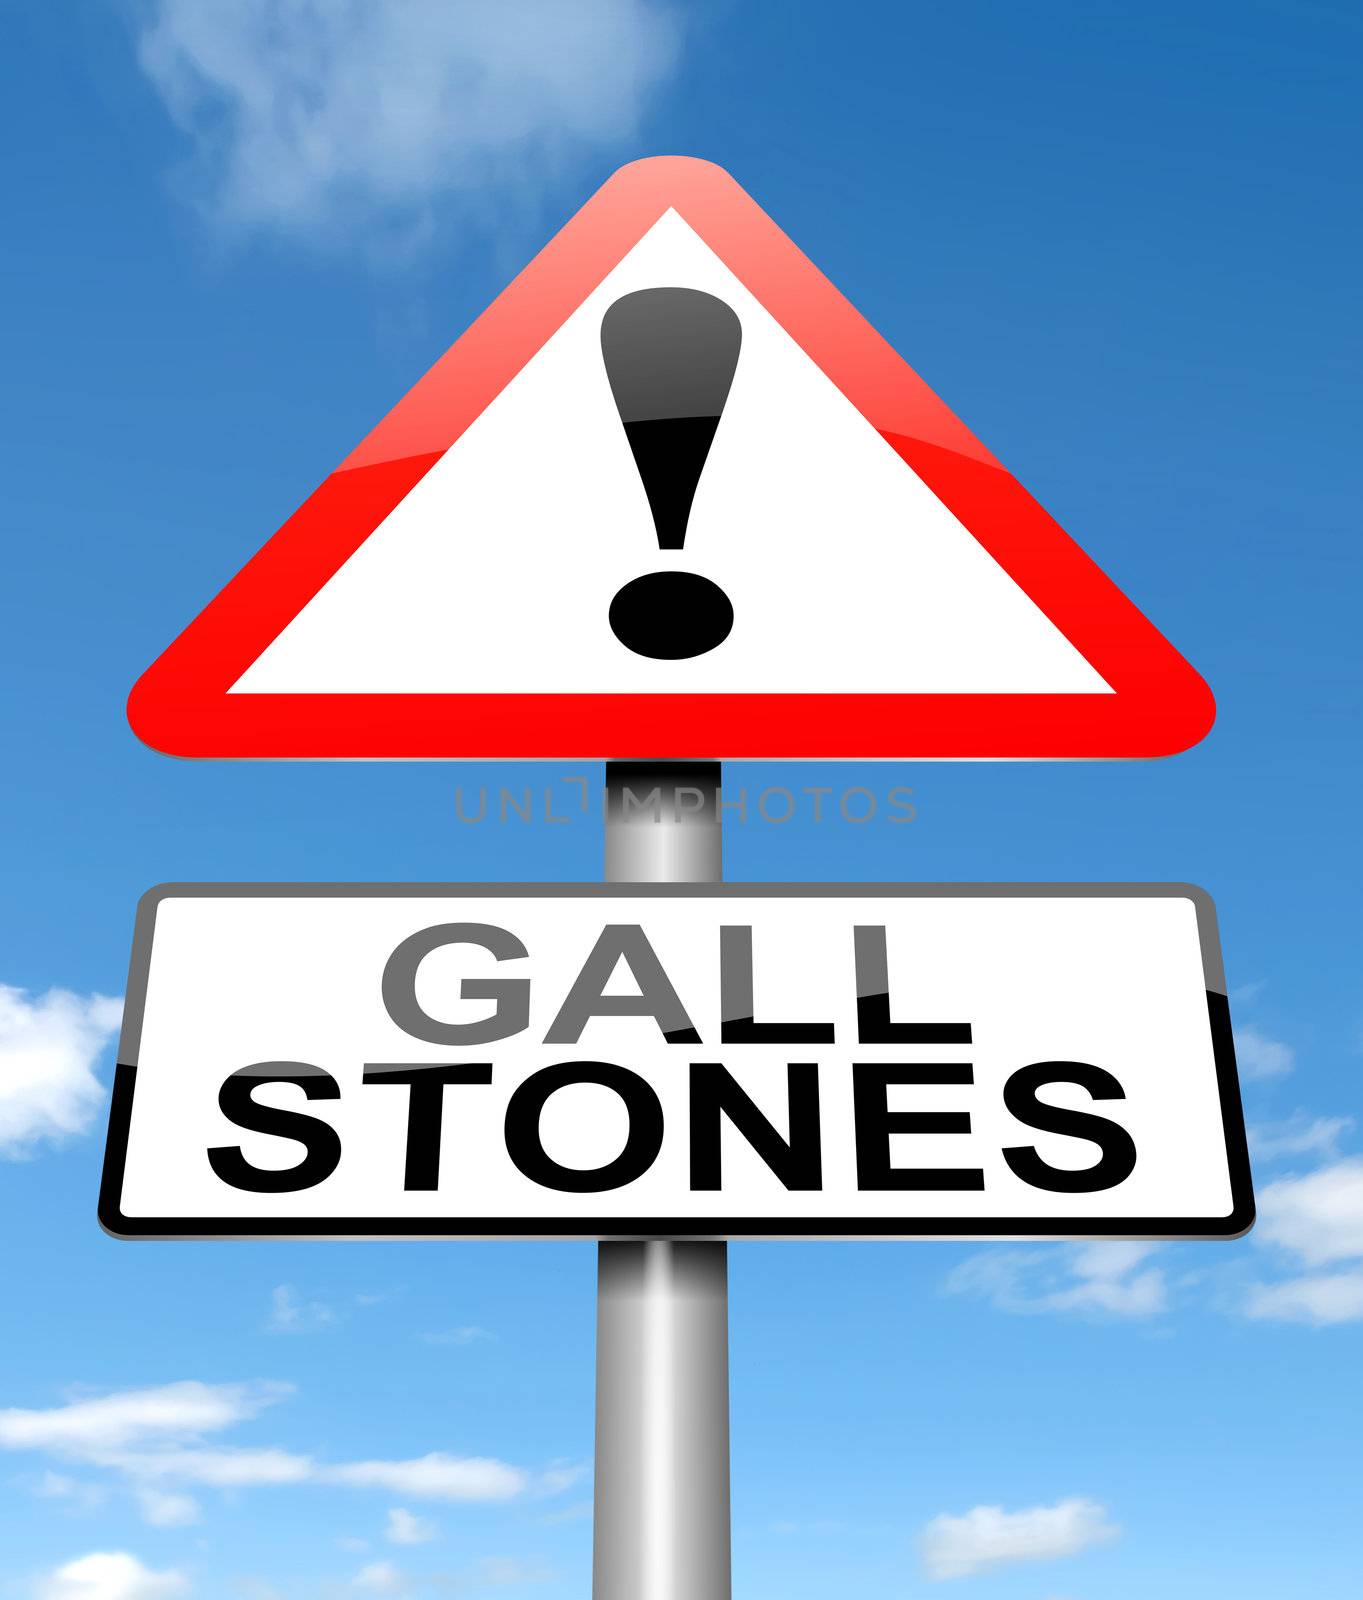 Illustration depicting a sign with a Gall stones concept.